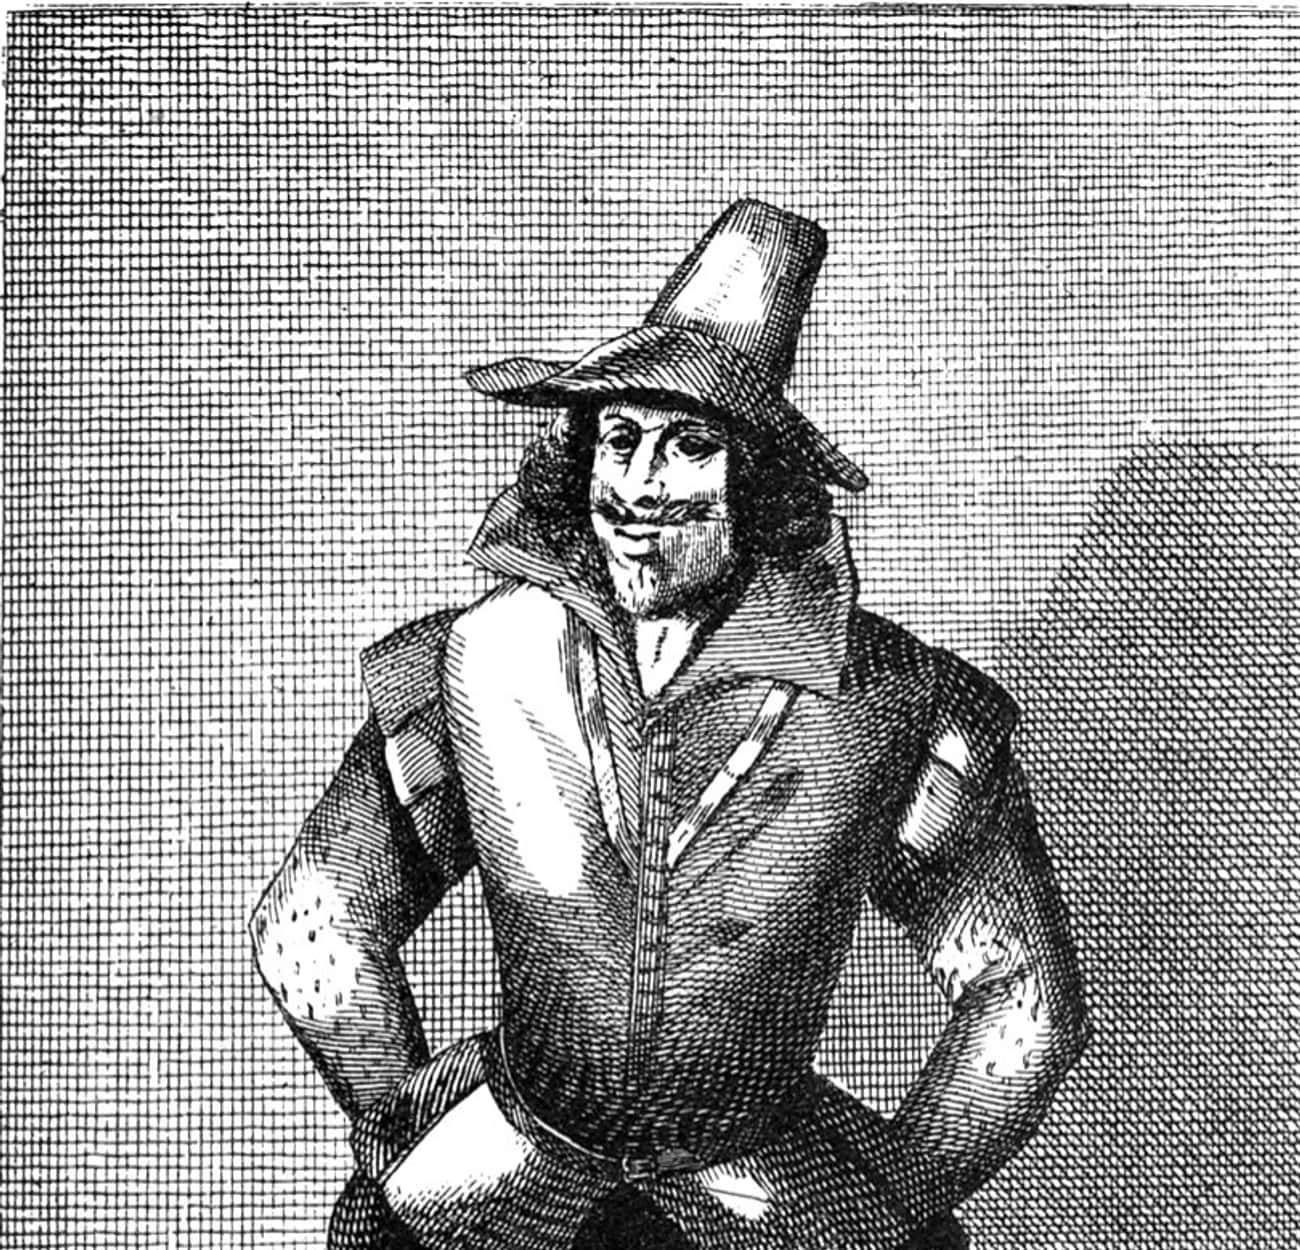 Guy Fawkes Facts | Who Was Guy Fawkes?